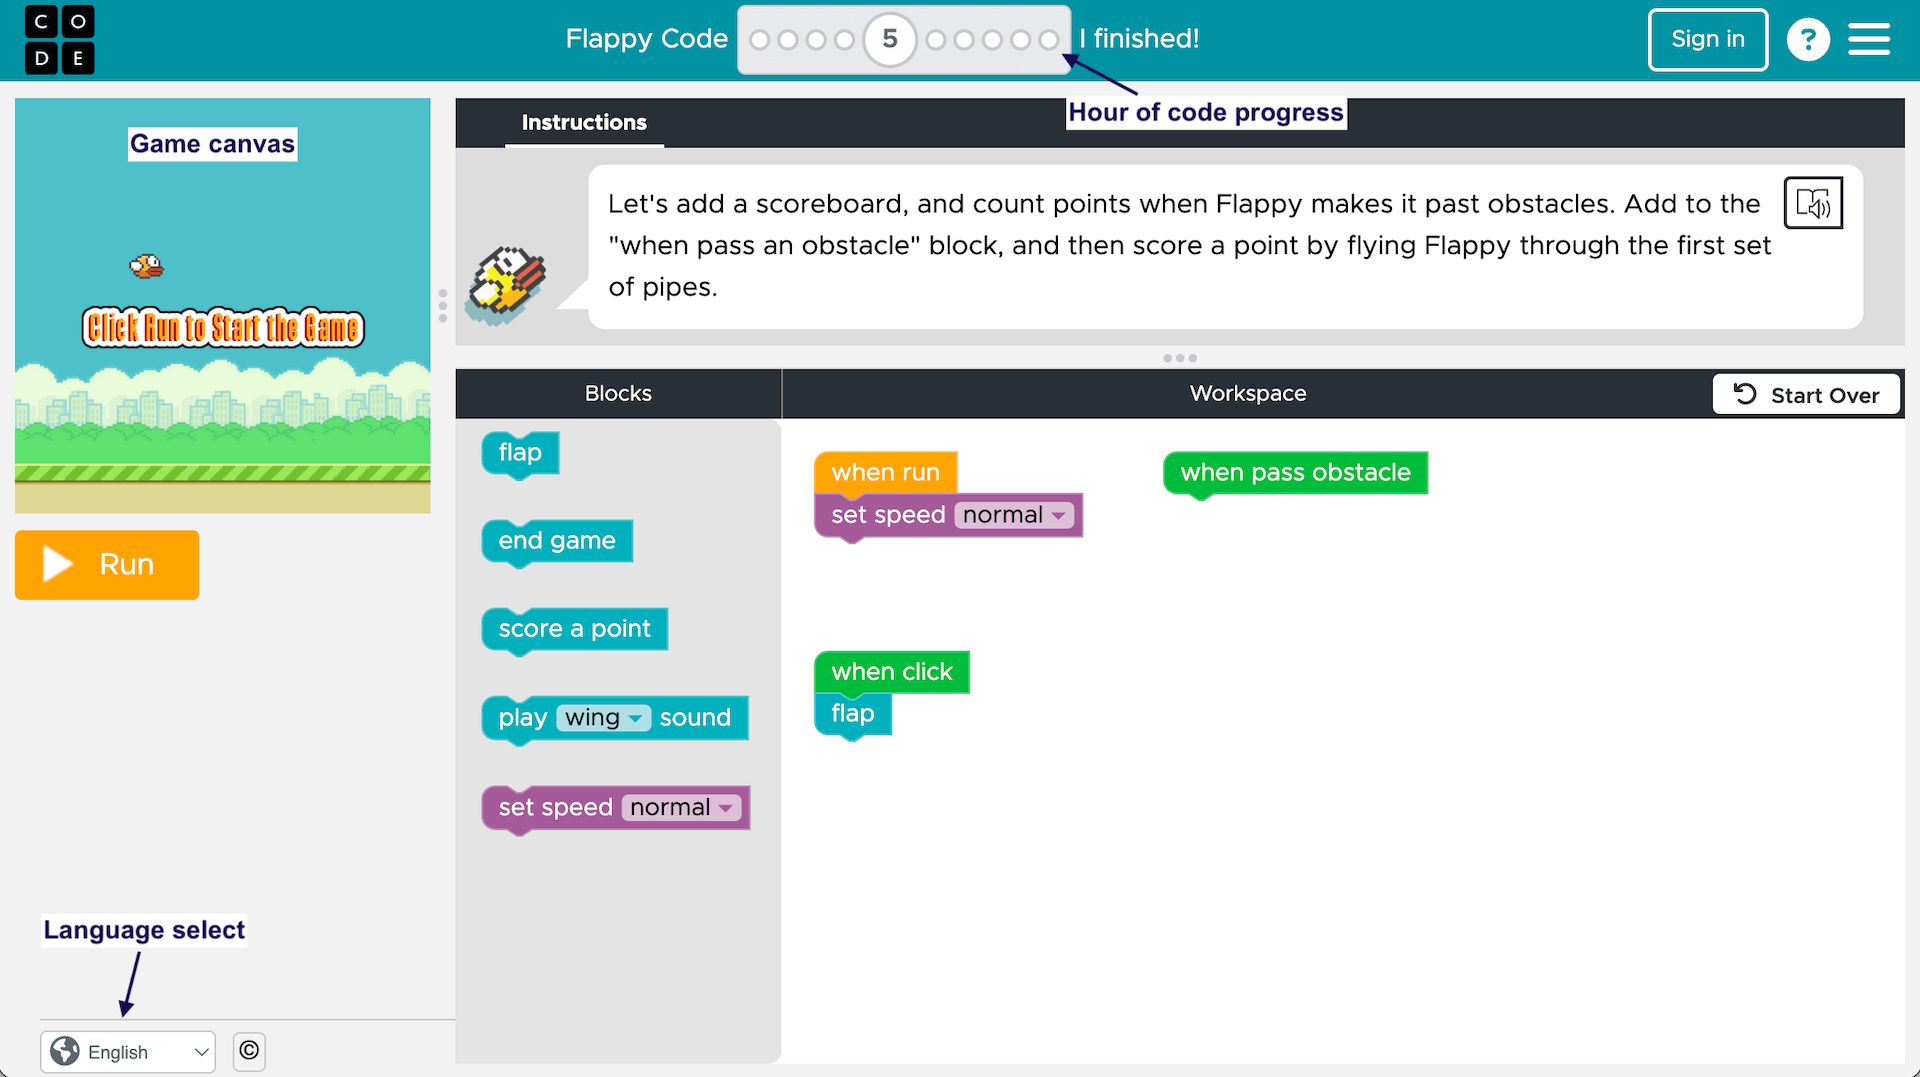 Screenshot of the hour of code website showing the Flappy Bird project